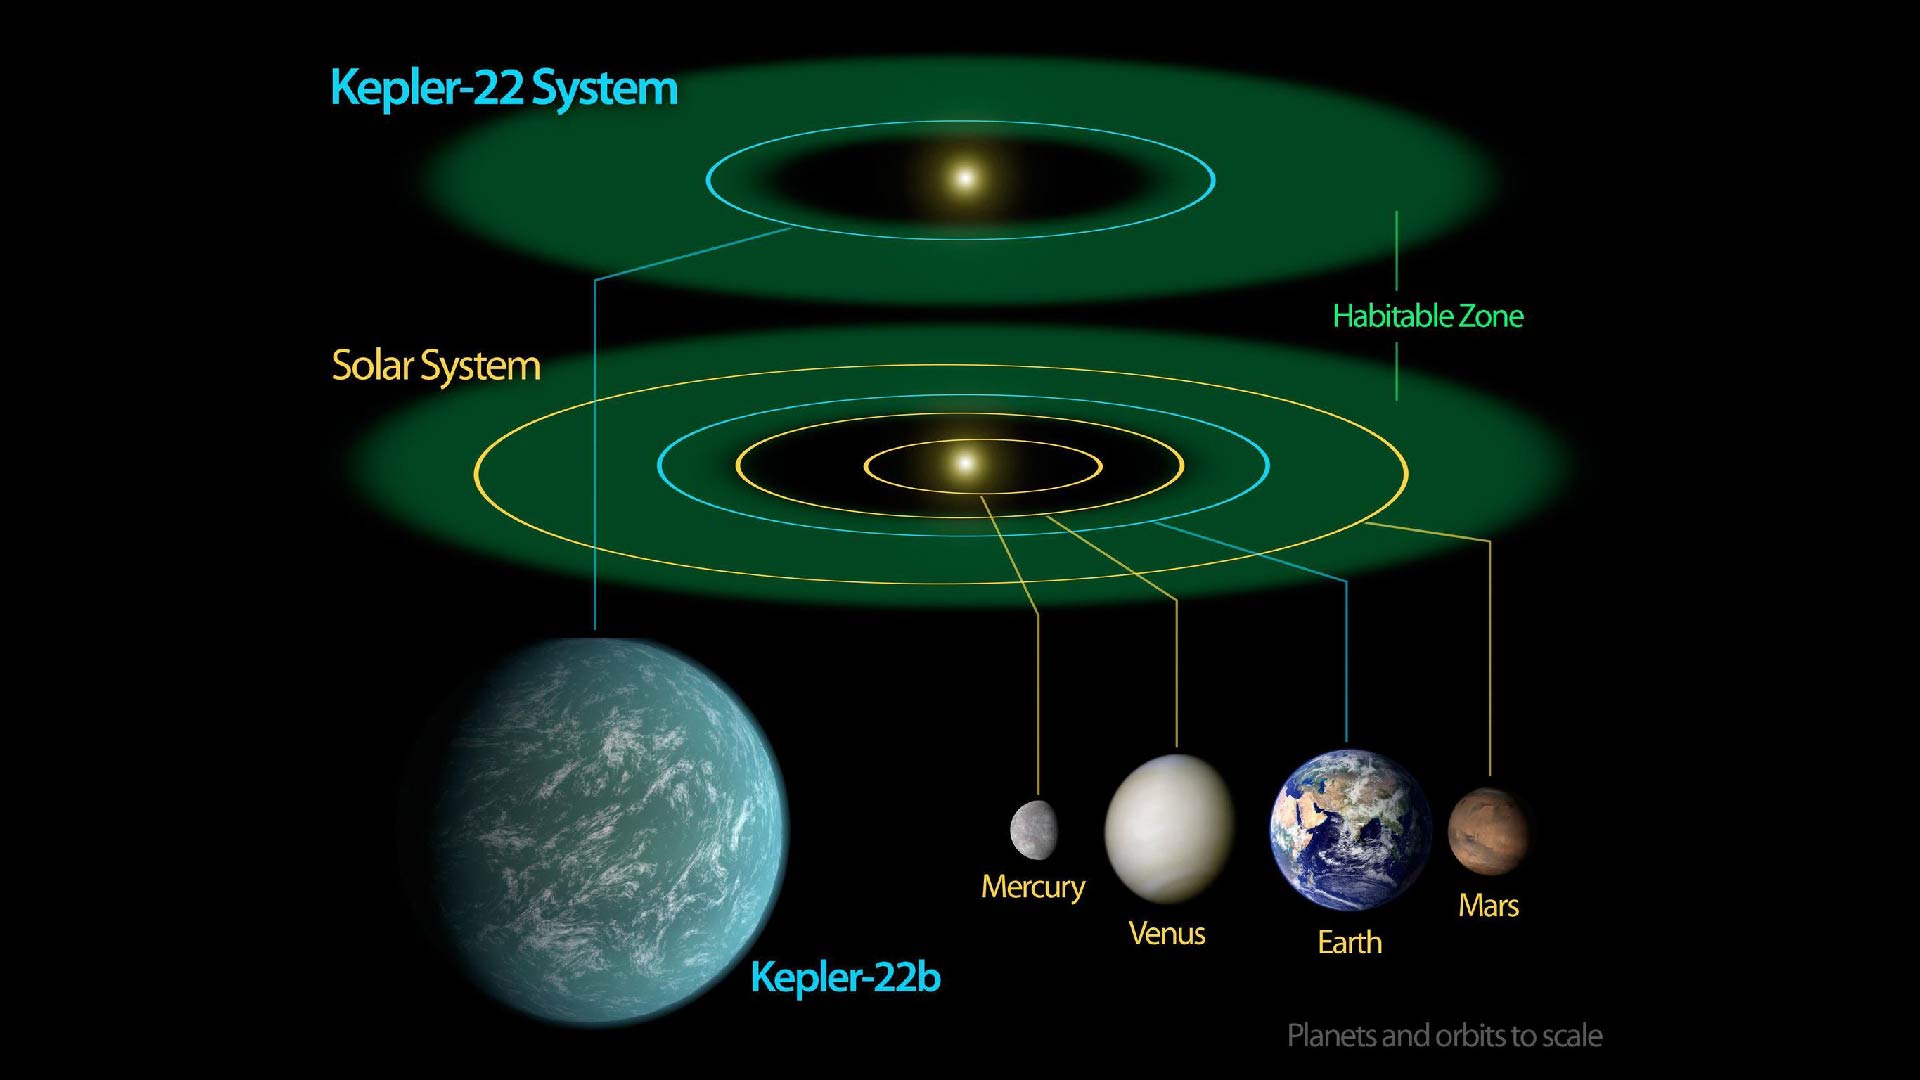 This diagram compares our own solar system to Kepler-22, a star system containing the first habitable zone planet. Kepler-22b is a light teal color and about twice the size of Earth, and it is also in the habitable zone of the solar system.